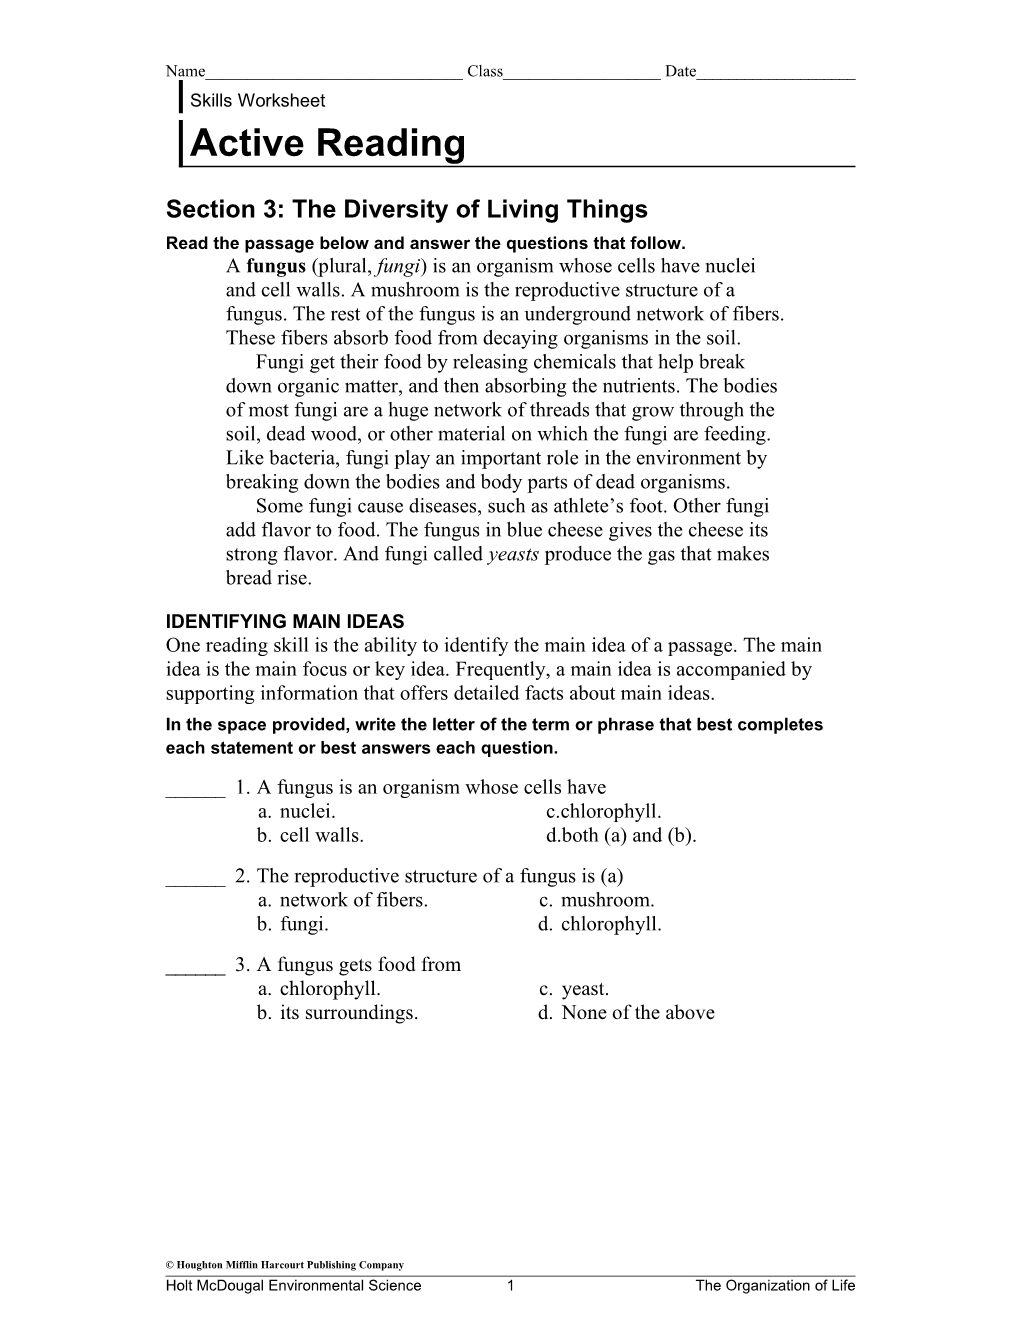 Section 3: the Diversity of Living Things